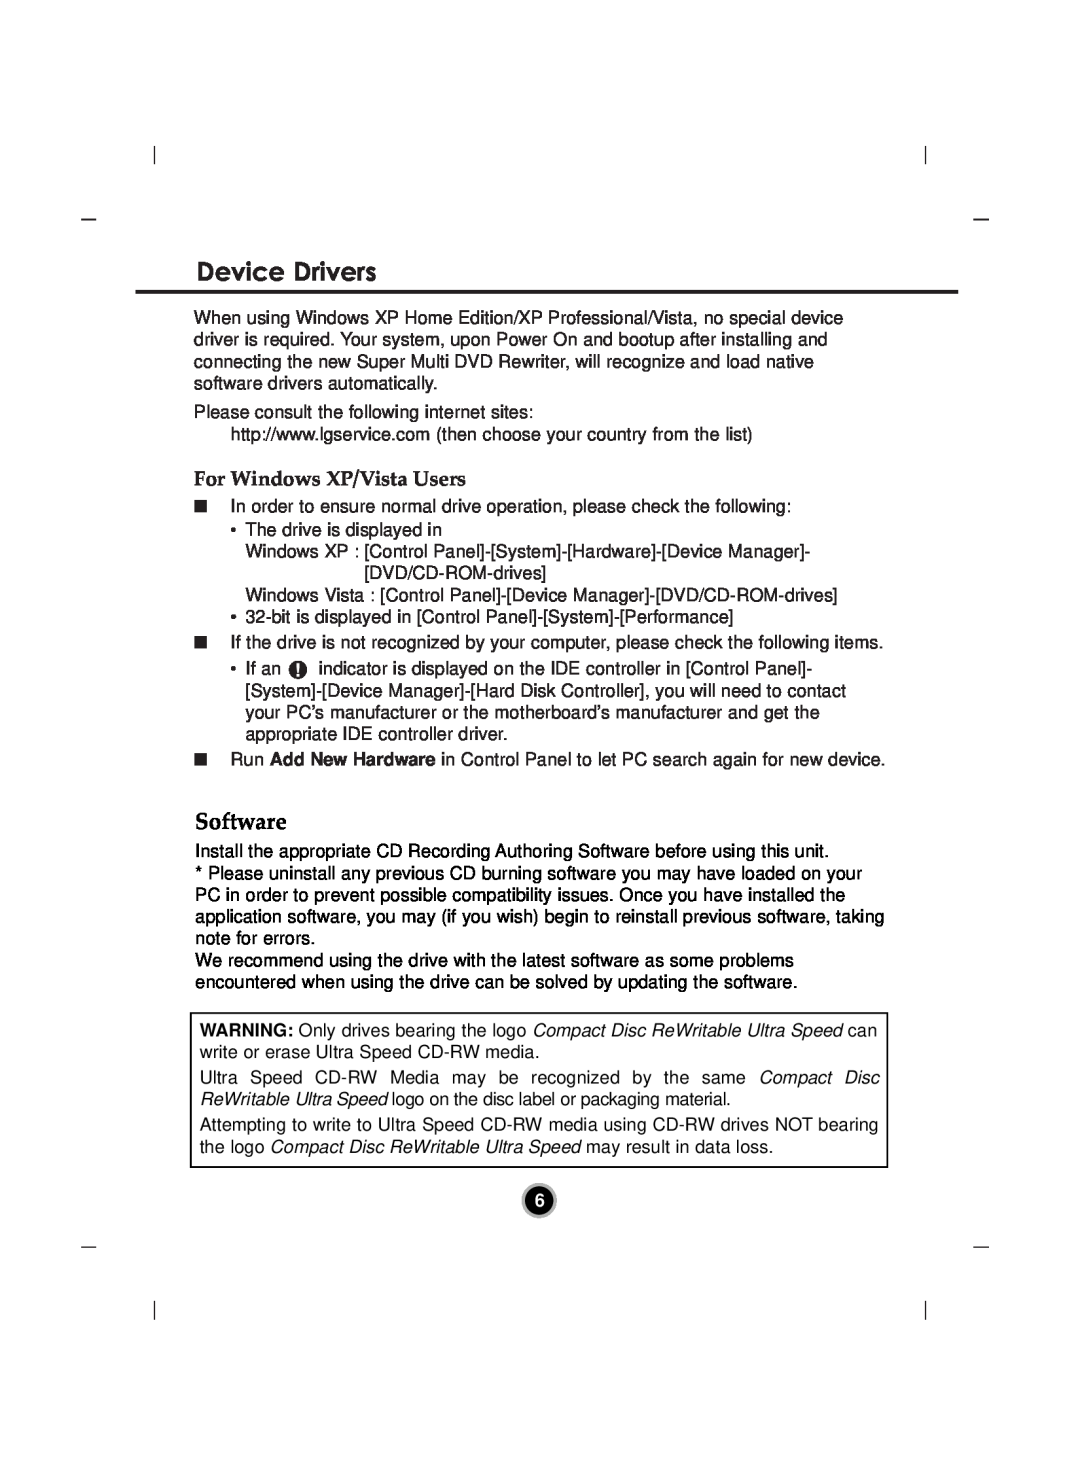 LG Electronics GH22 manual Device Drivers, For Windows XP/Vista Users, Software 